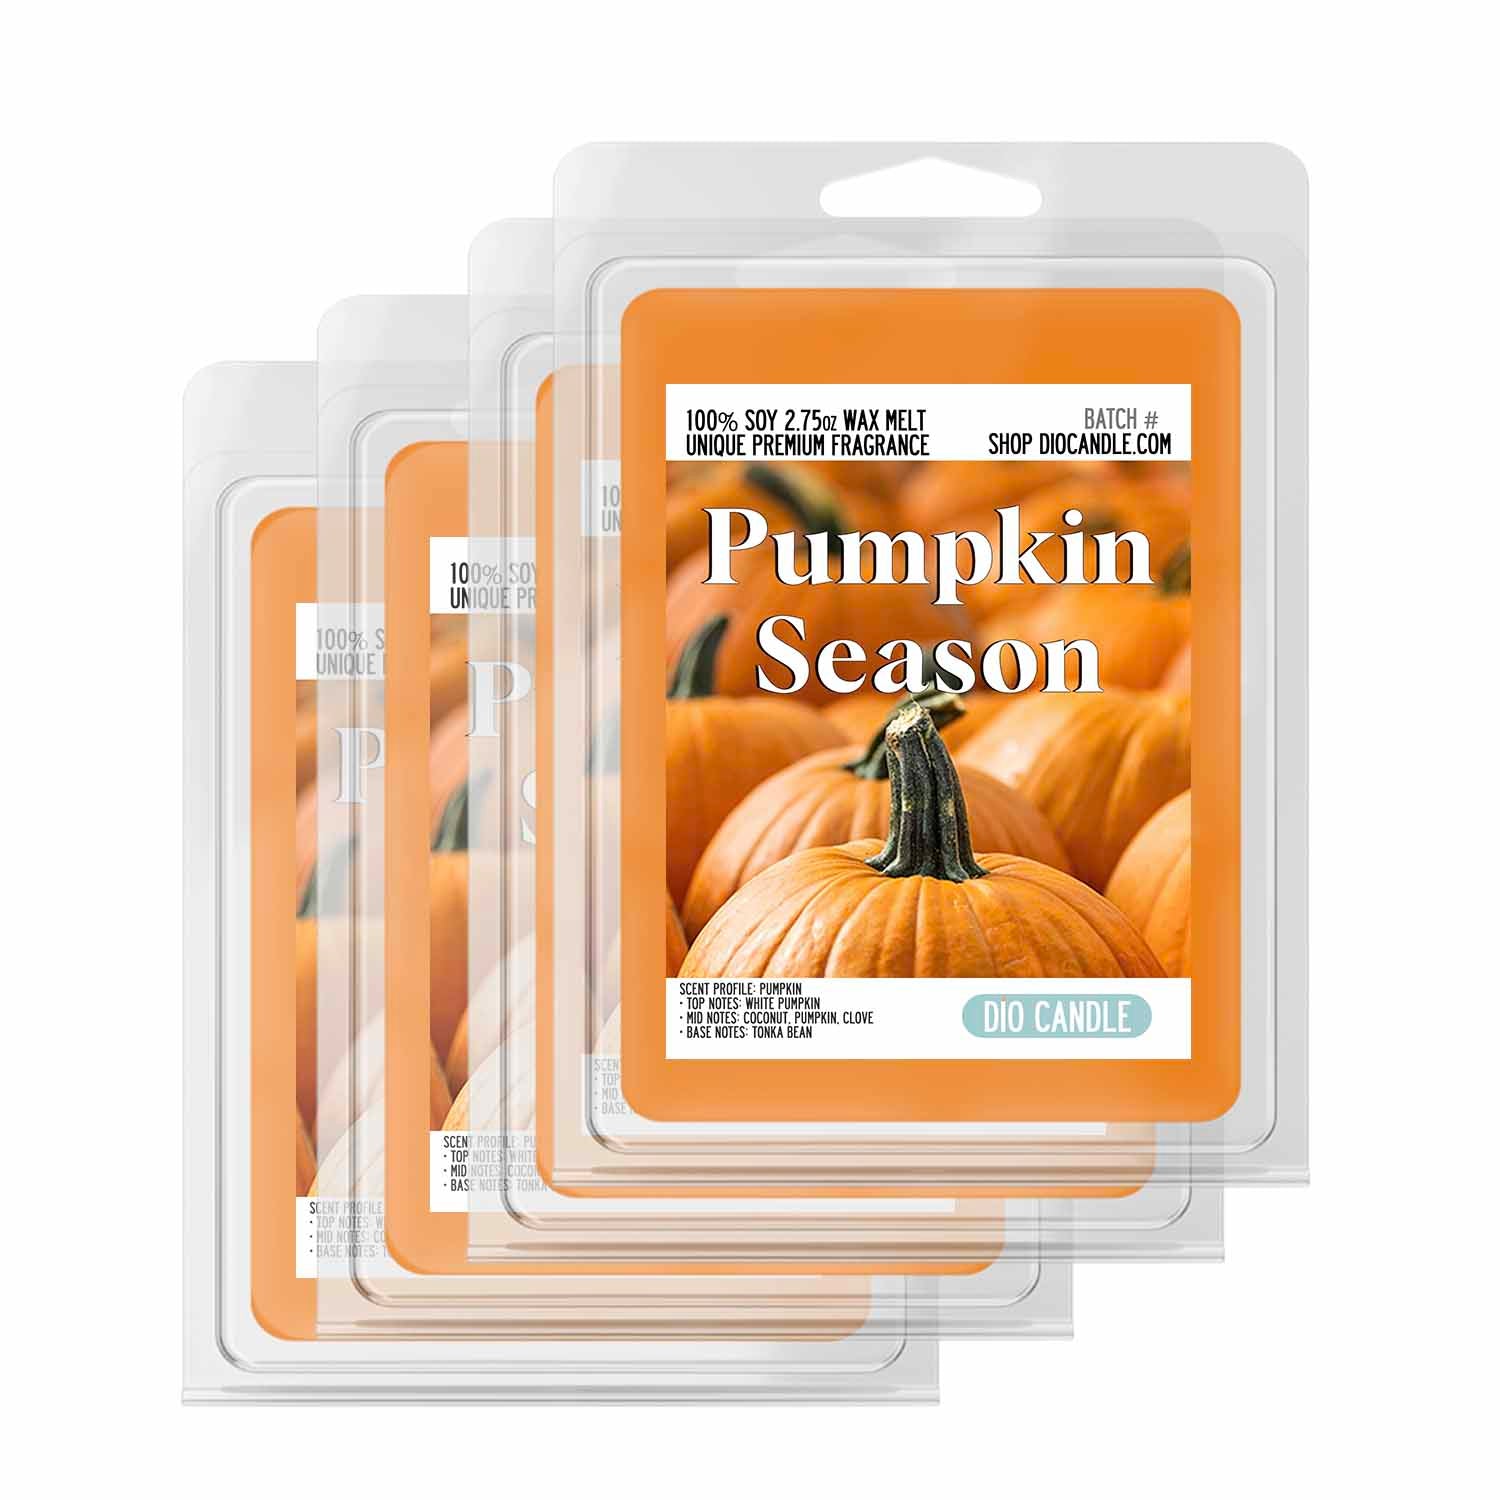 Happy Wax Spicy Pumpkin Scented Soy Wax Melts Collection 6 Oz. of